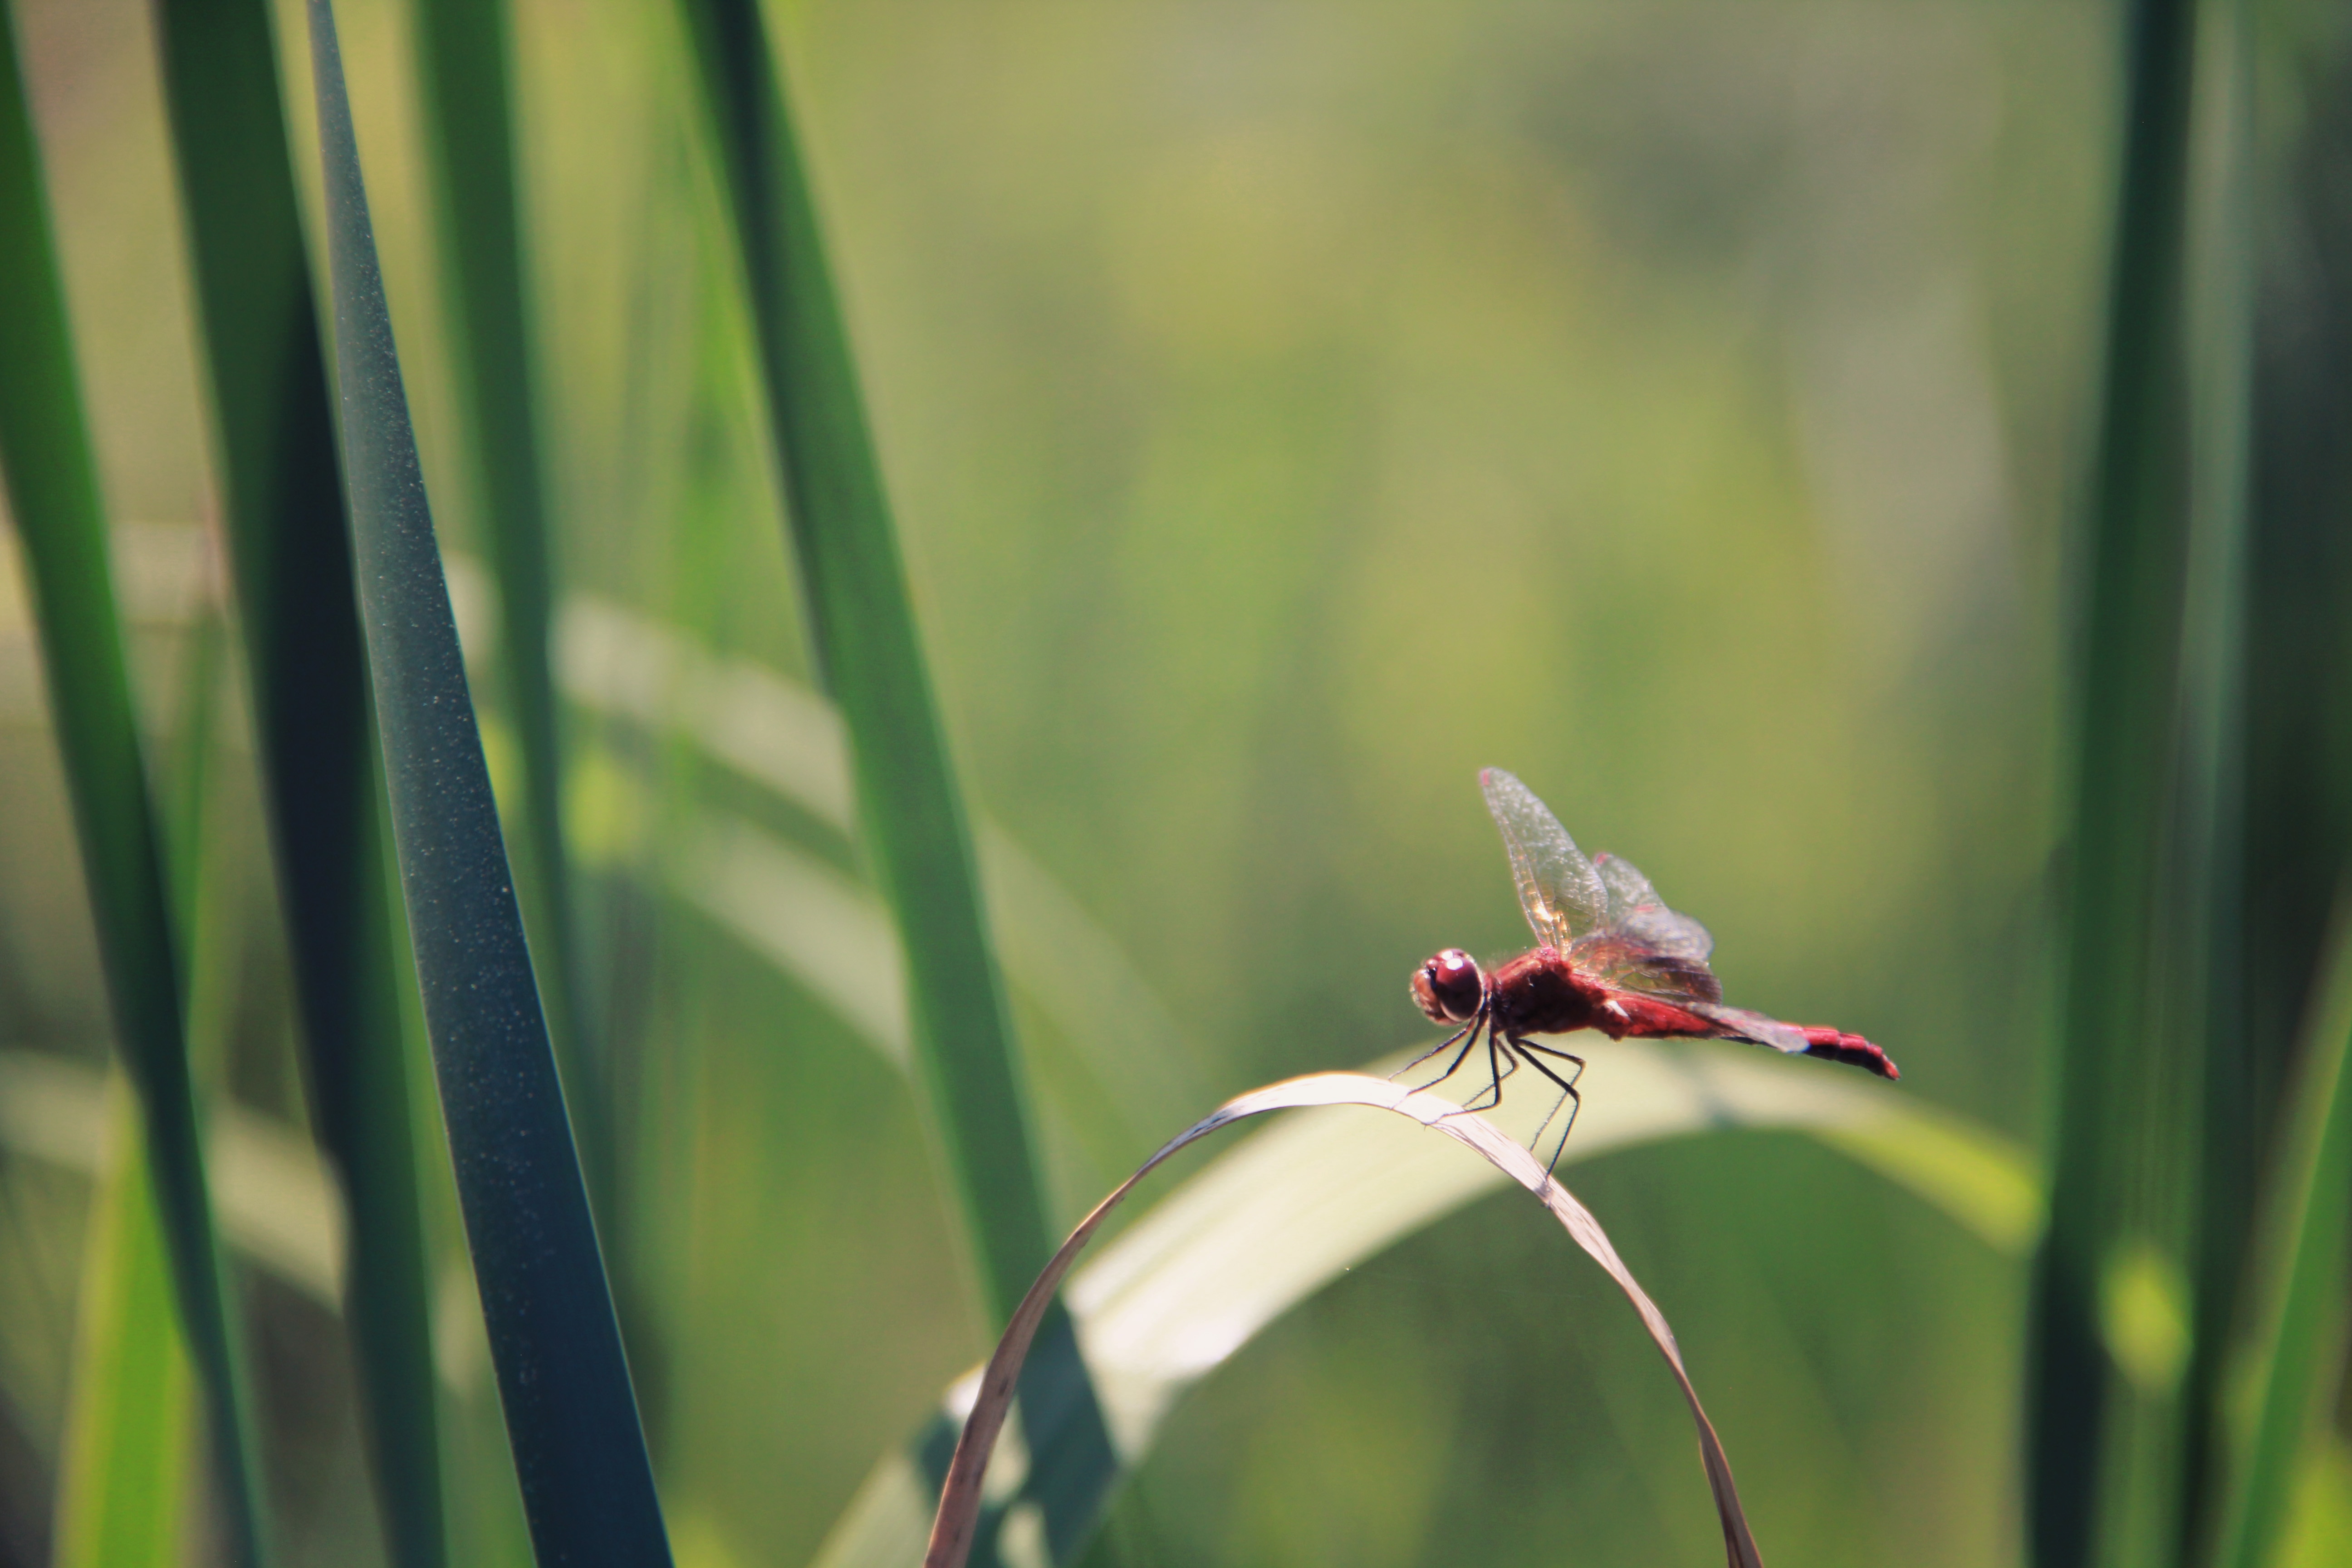 flame skimmer dragonfly perched on brown leaf in shallow focus lens